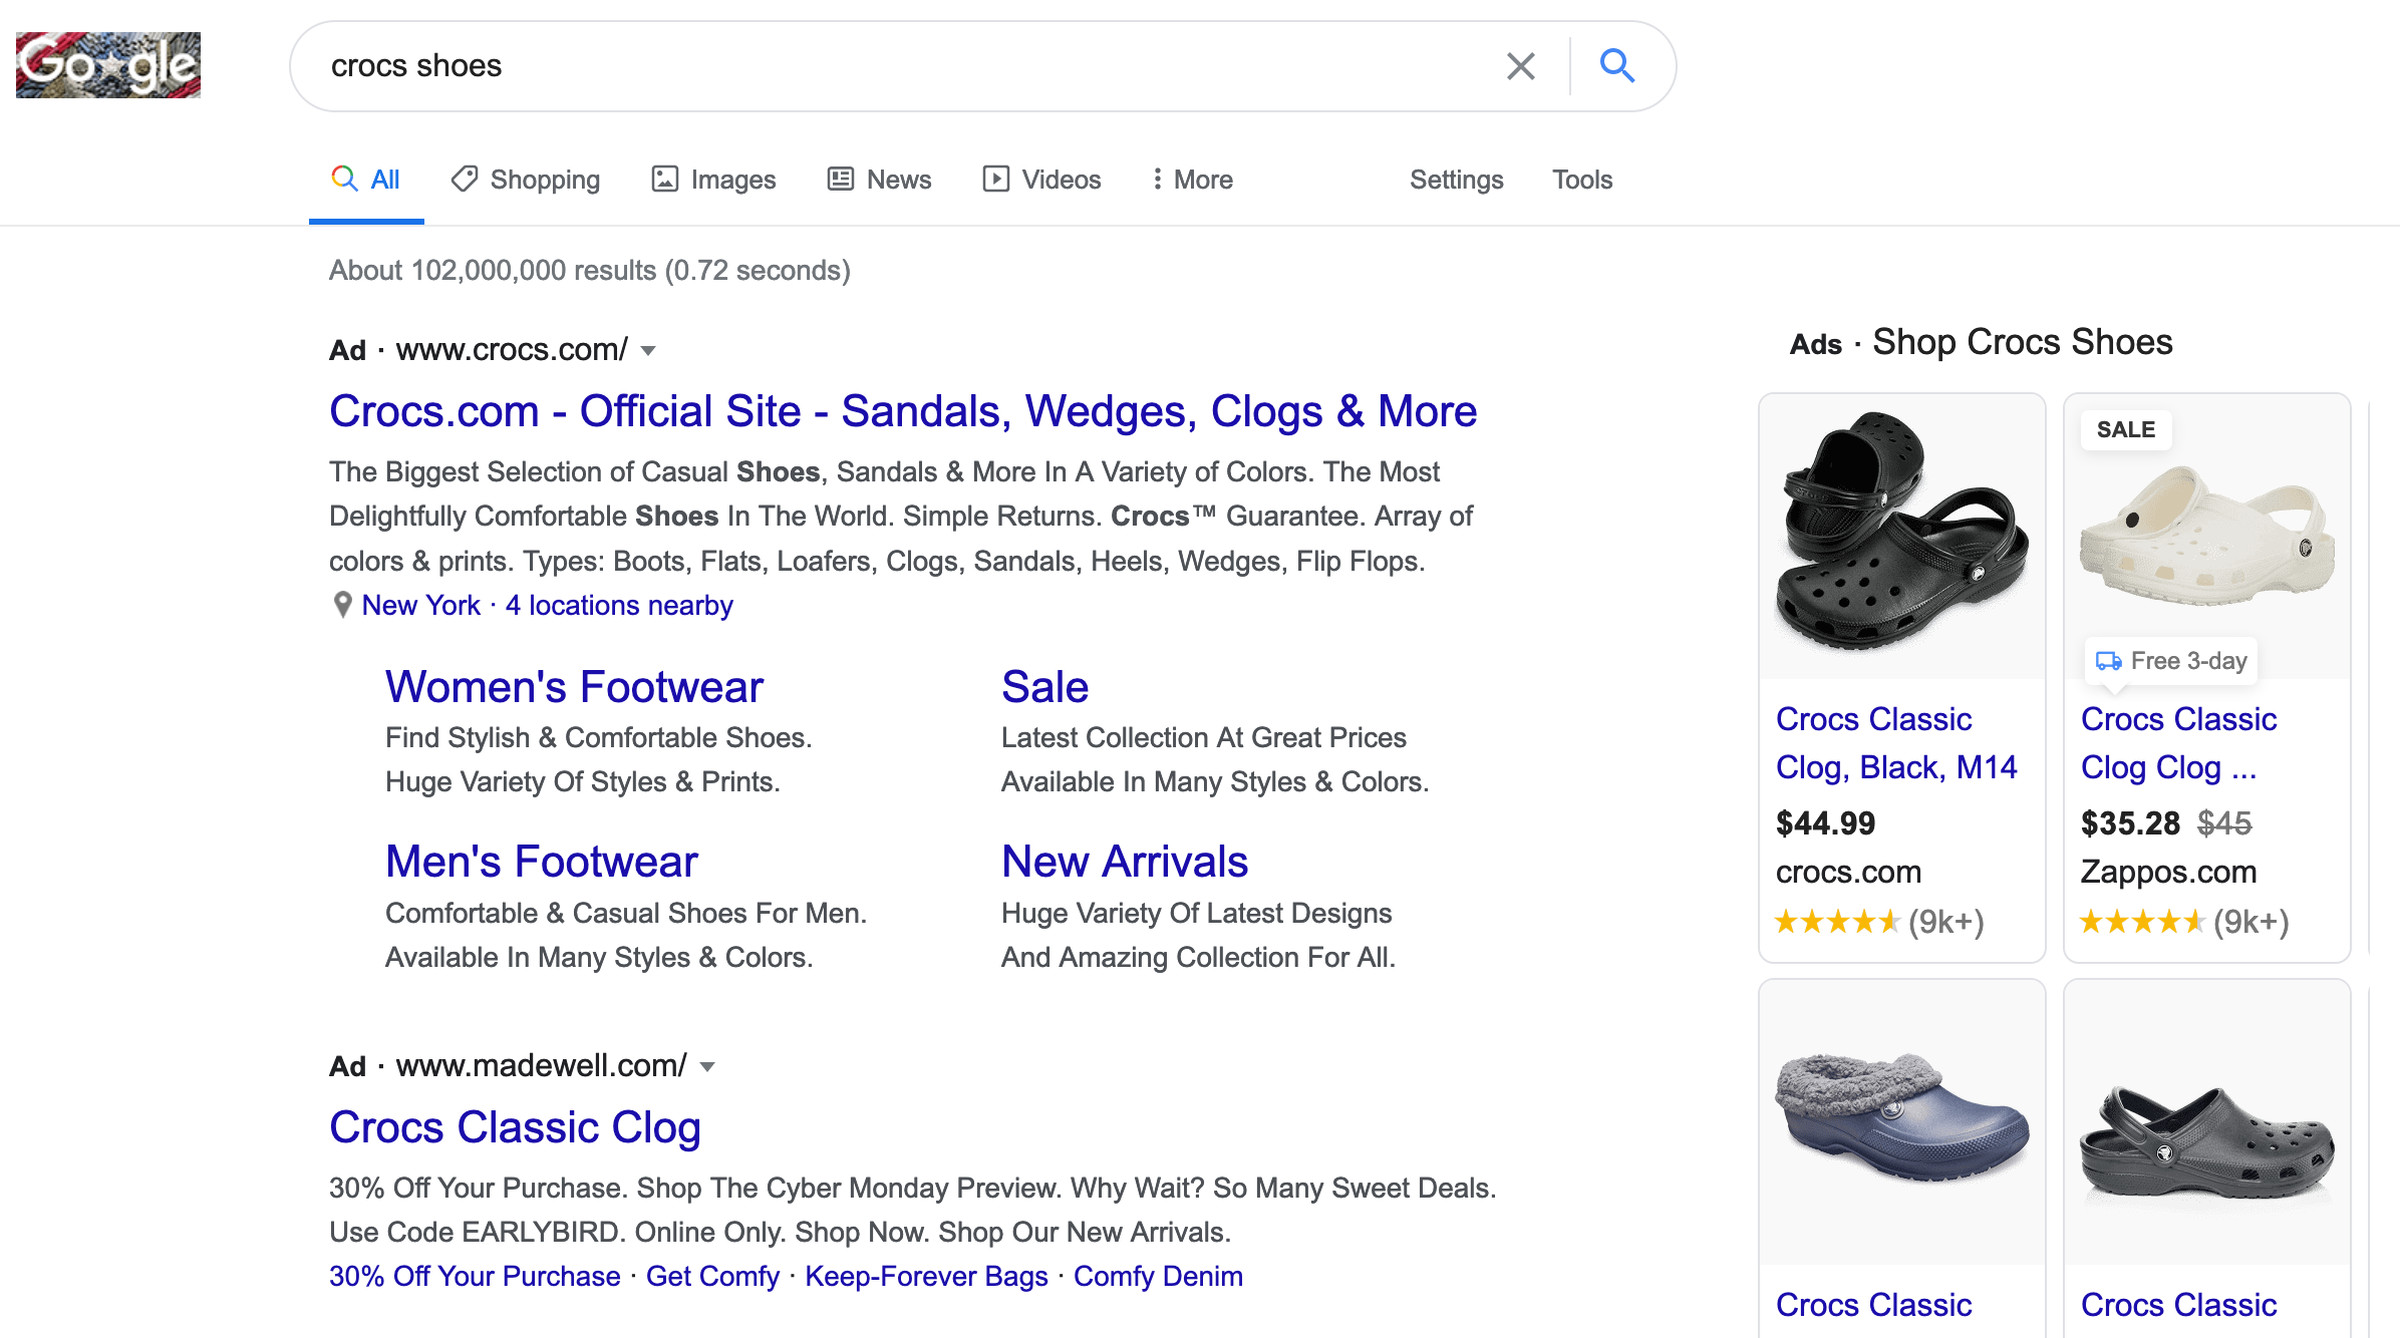 A standard Google search for “crocs shoes.”